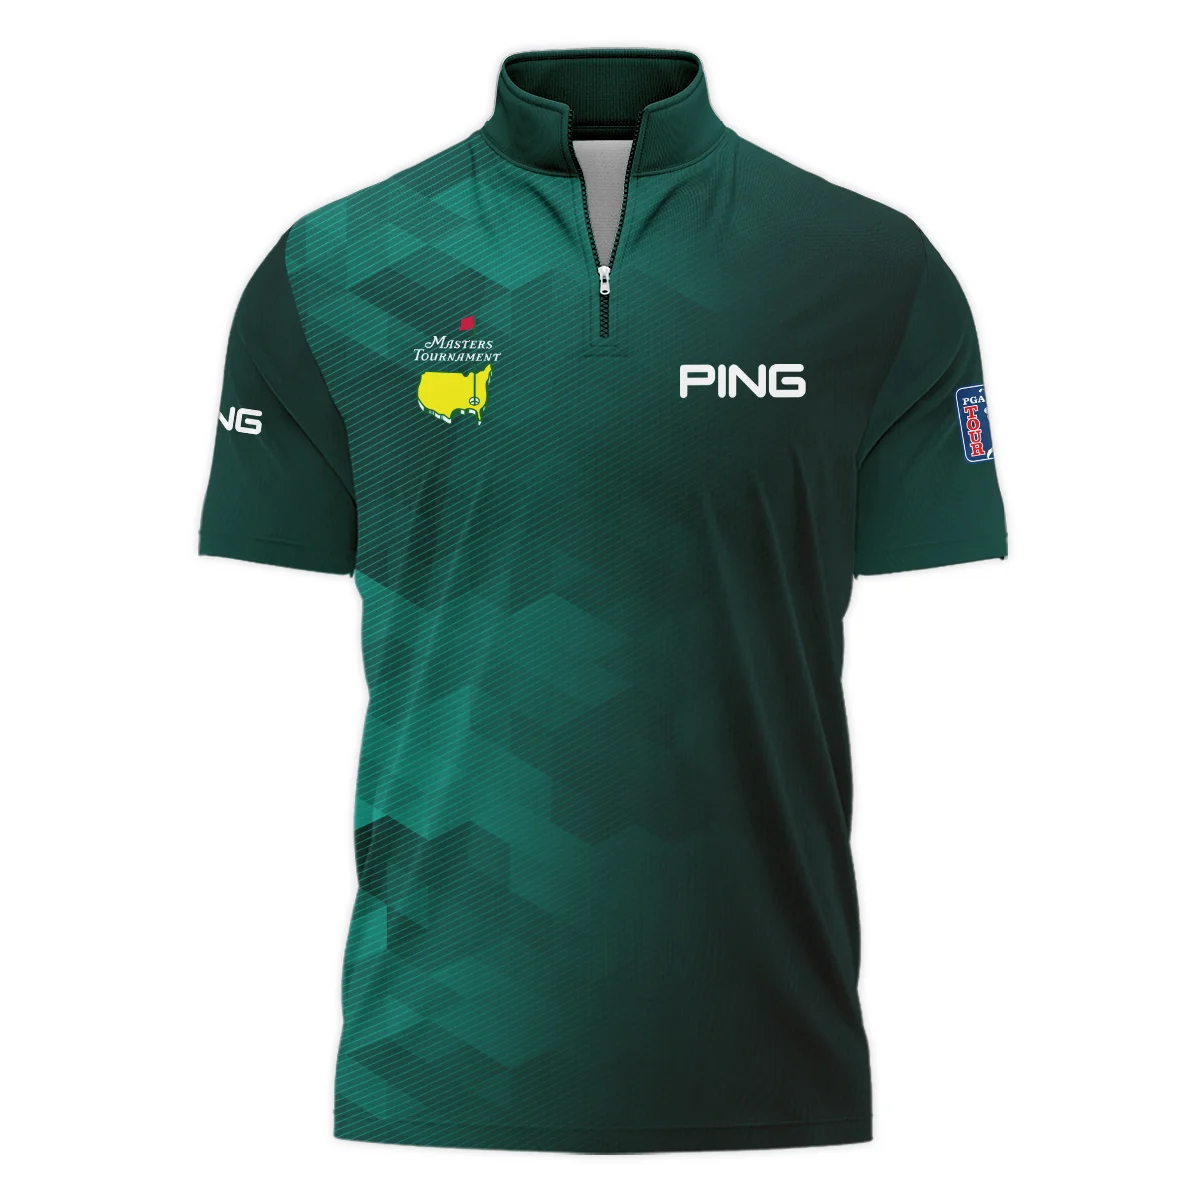 Ping Golf Sport Dark Green Gradient Abstract Background Masters Tournament Style Classic, Short Sleeve Polo Shirts Quarter-Zip Casual Slim Fit Mock Neck Basic